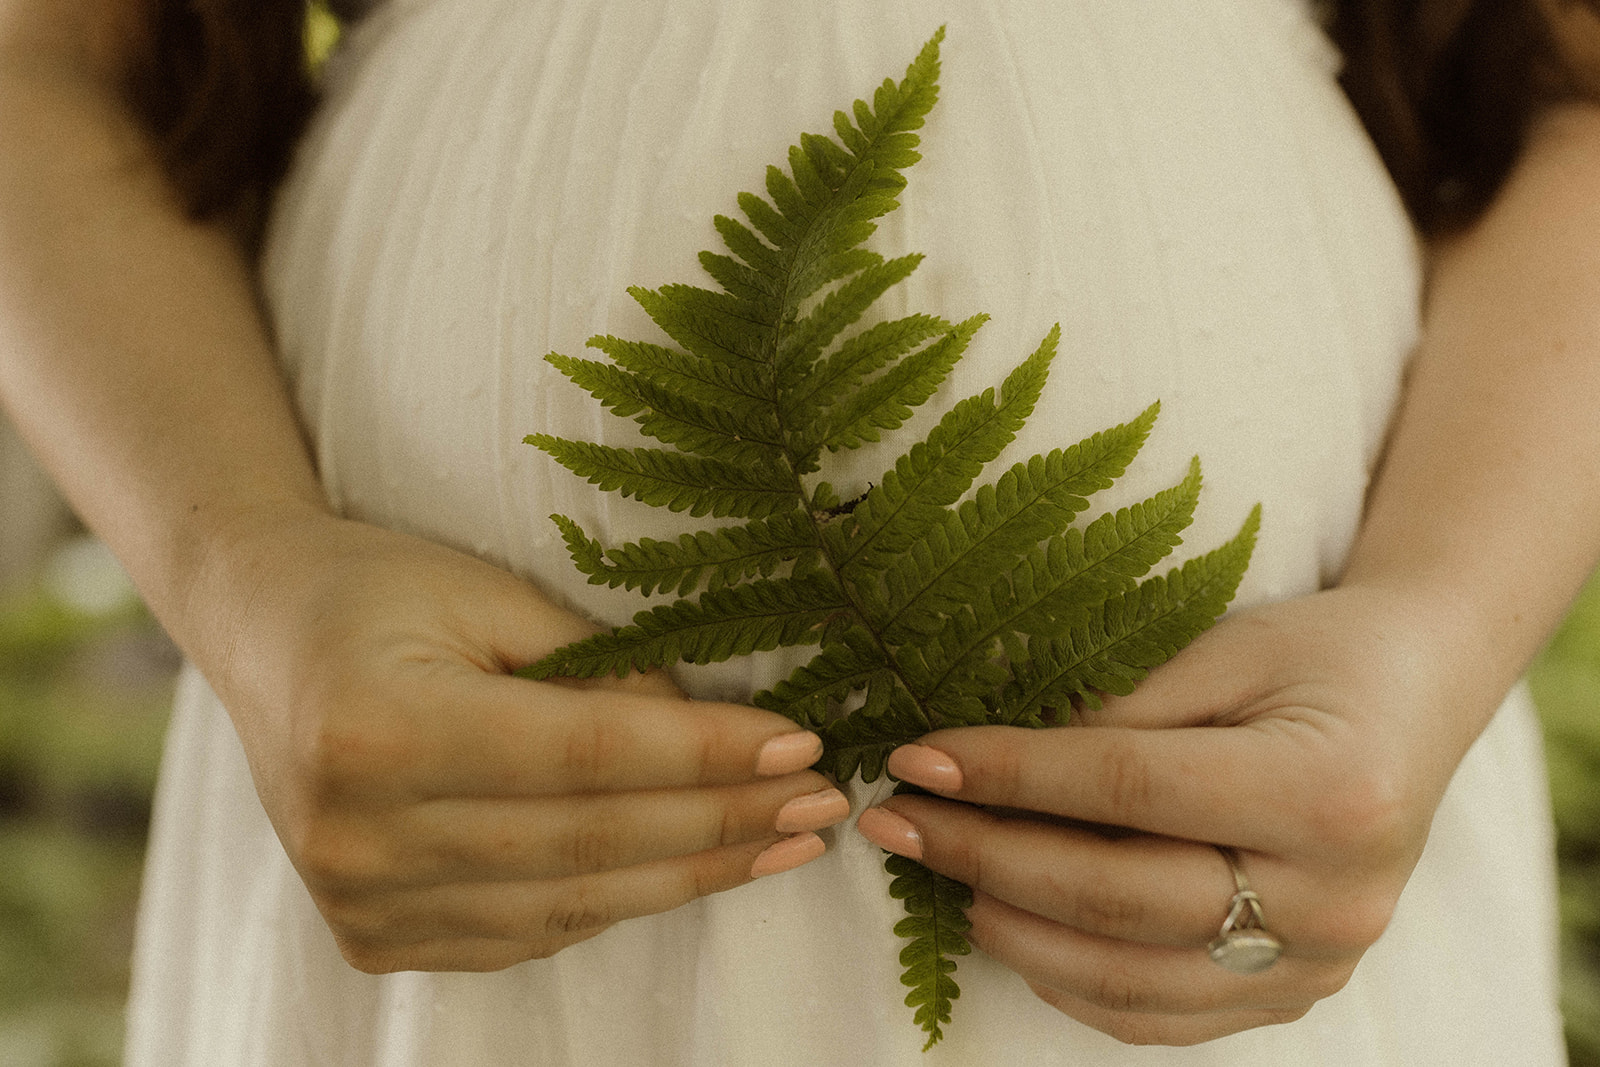 Elegant soon to be mom poses with a fern during her unique maternity photoshoot